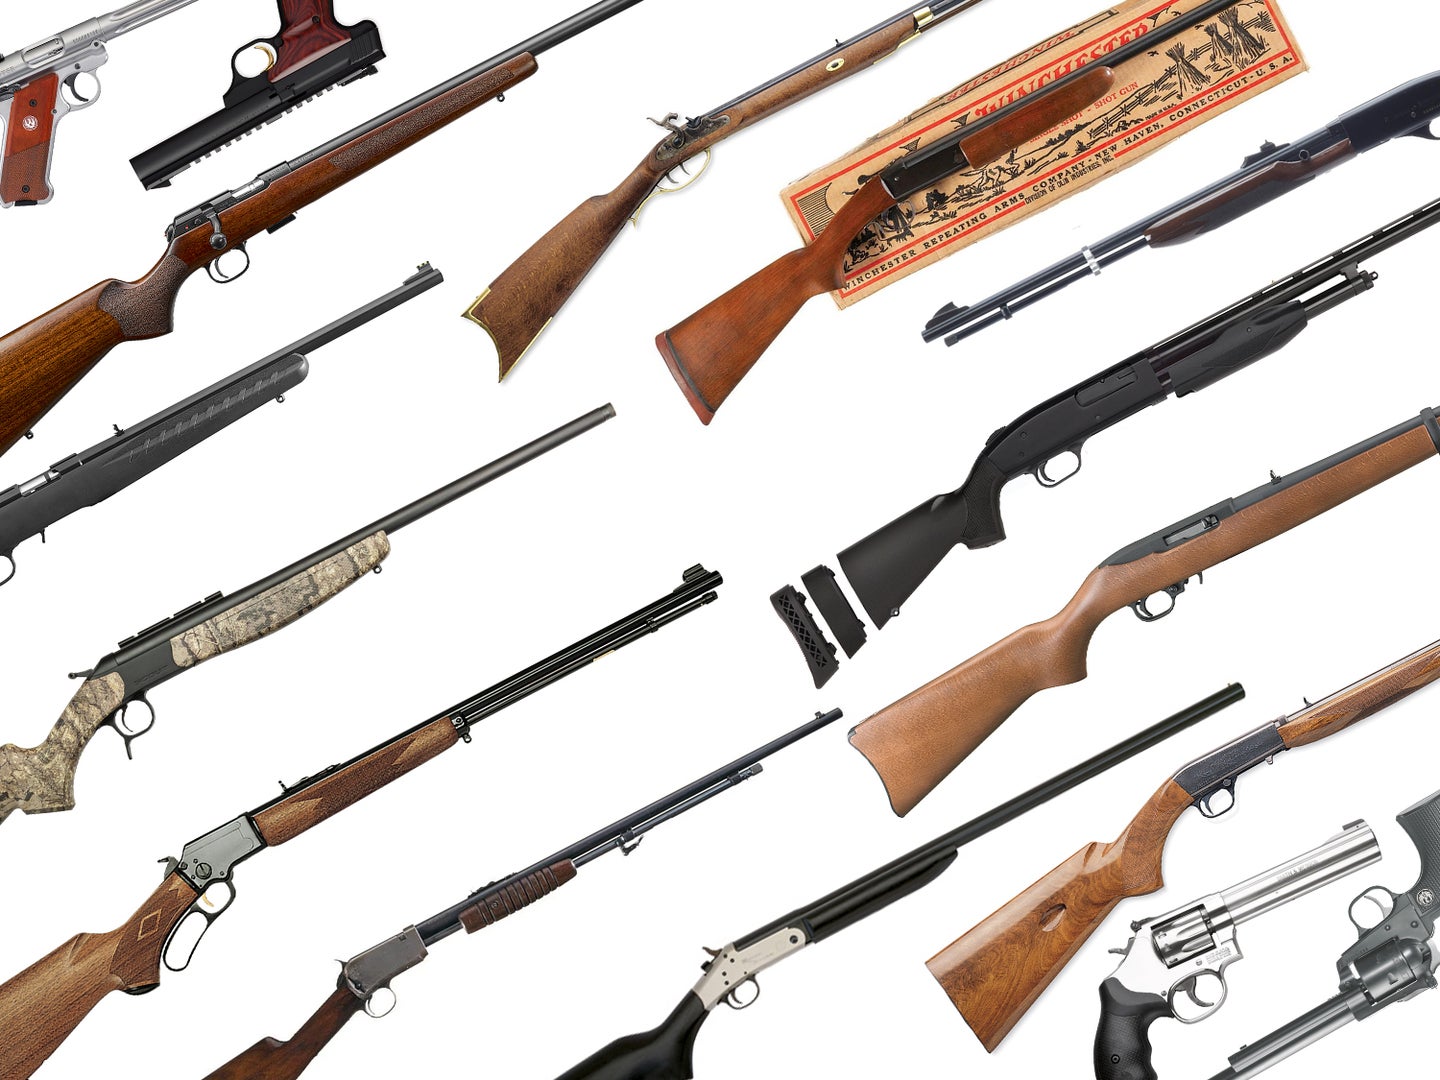 A collection of squirrel hunting rifles, shotguns, and handguns on a white background.